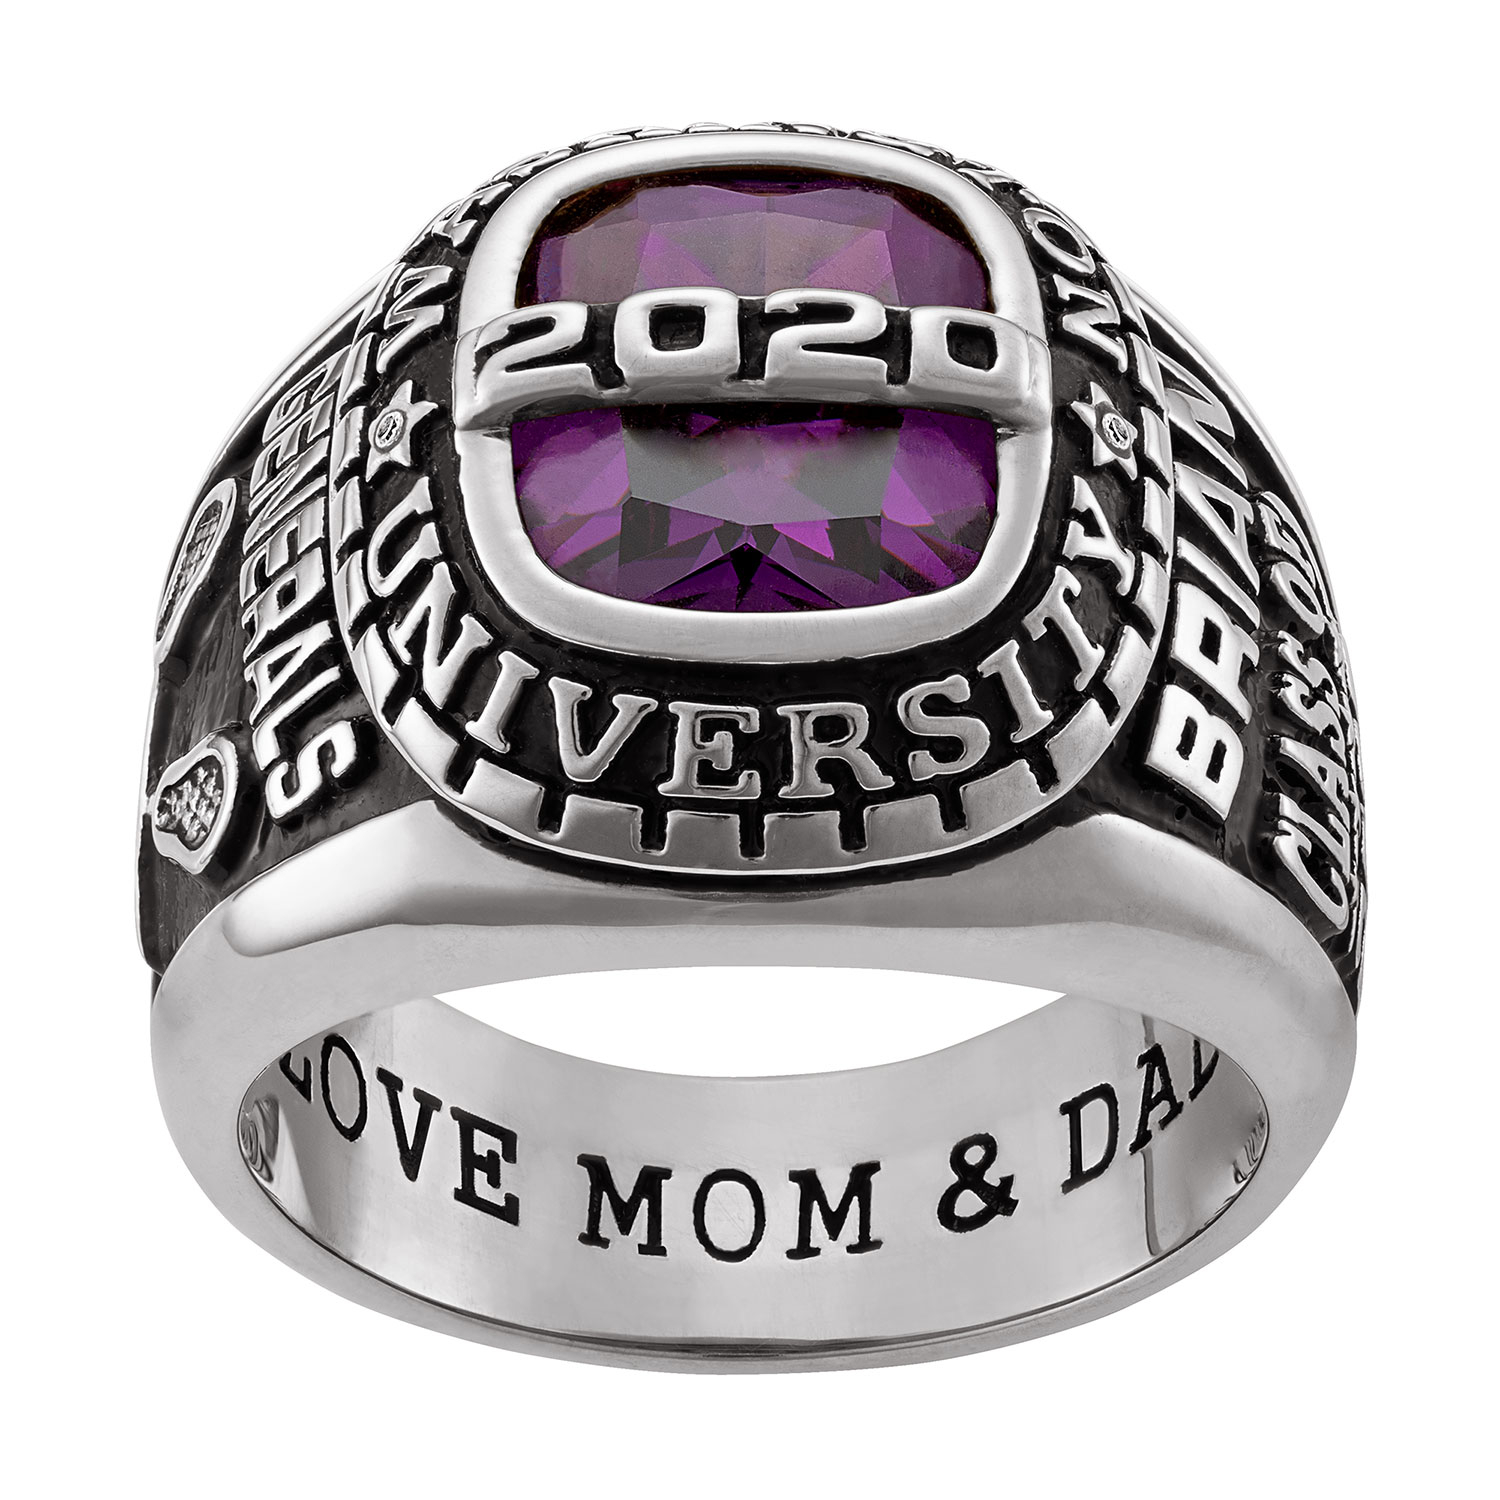 Platinum Plated Sterling Silver Personalized-Top Birthstone Class Ring